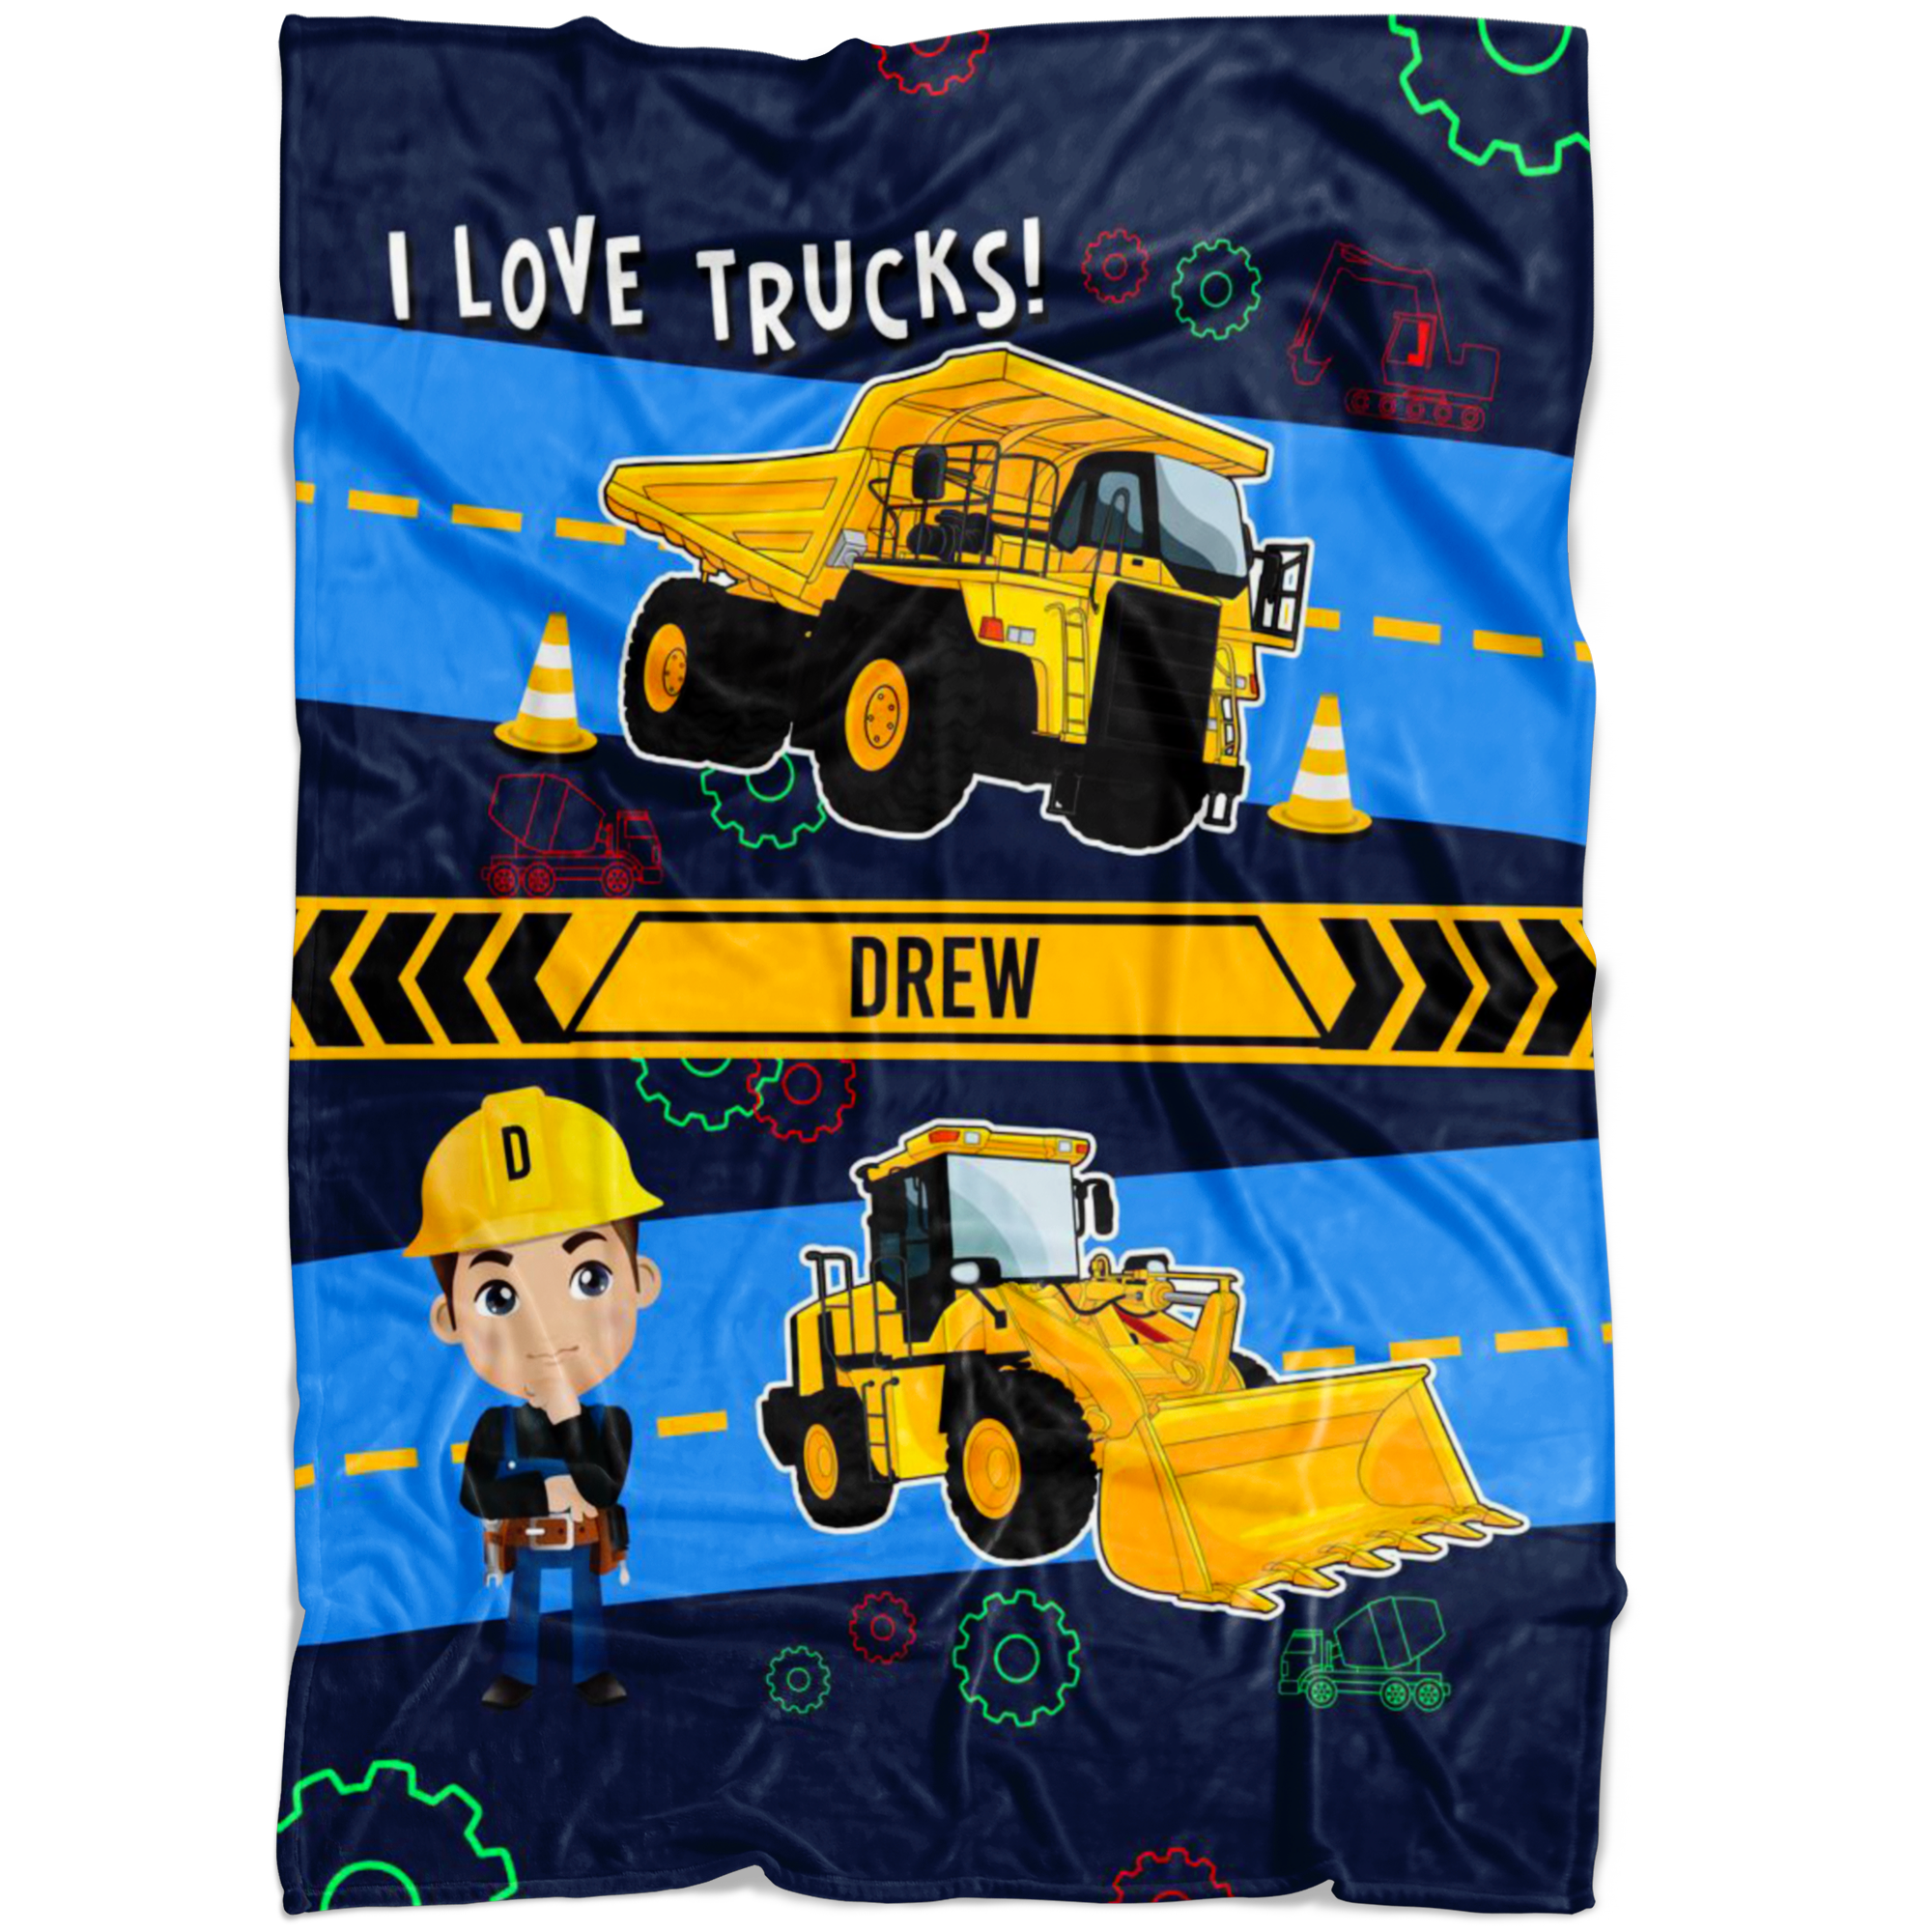 Personalized Name I Love Trucks Blanket for Boys & Girls with Character Personalization - Drew